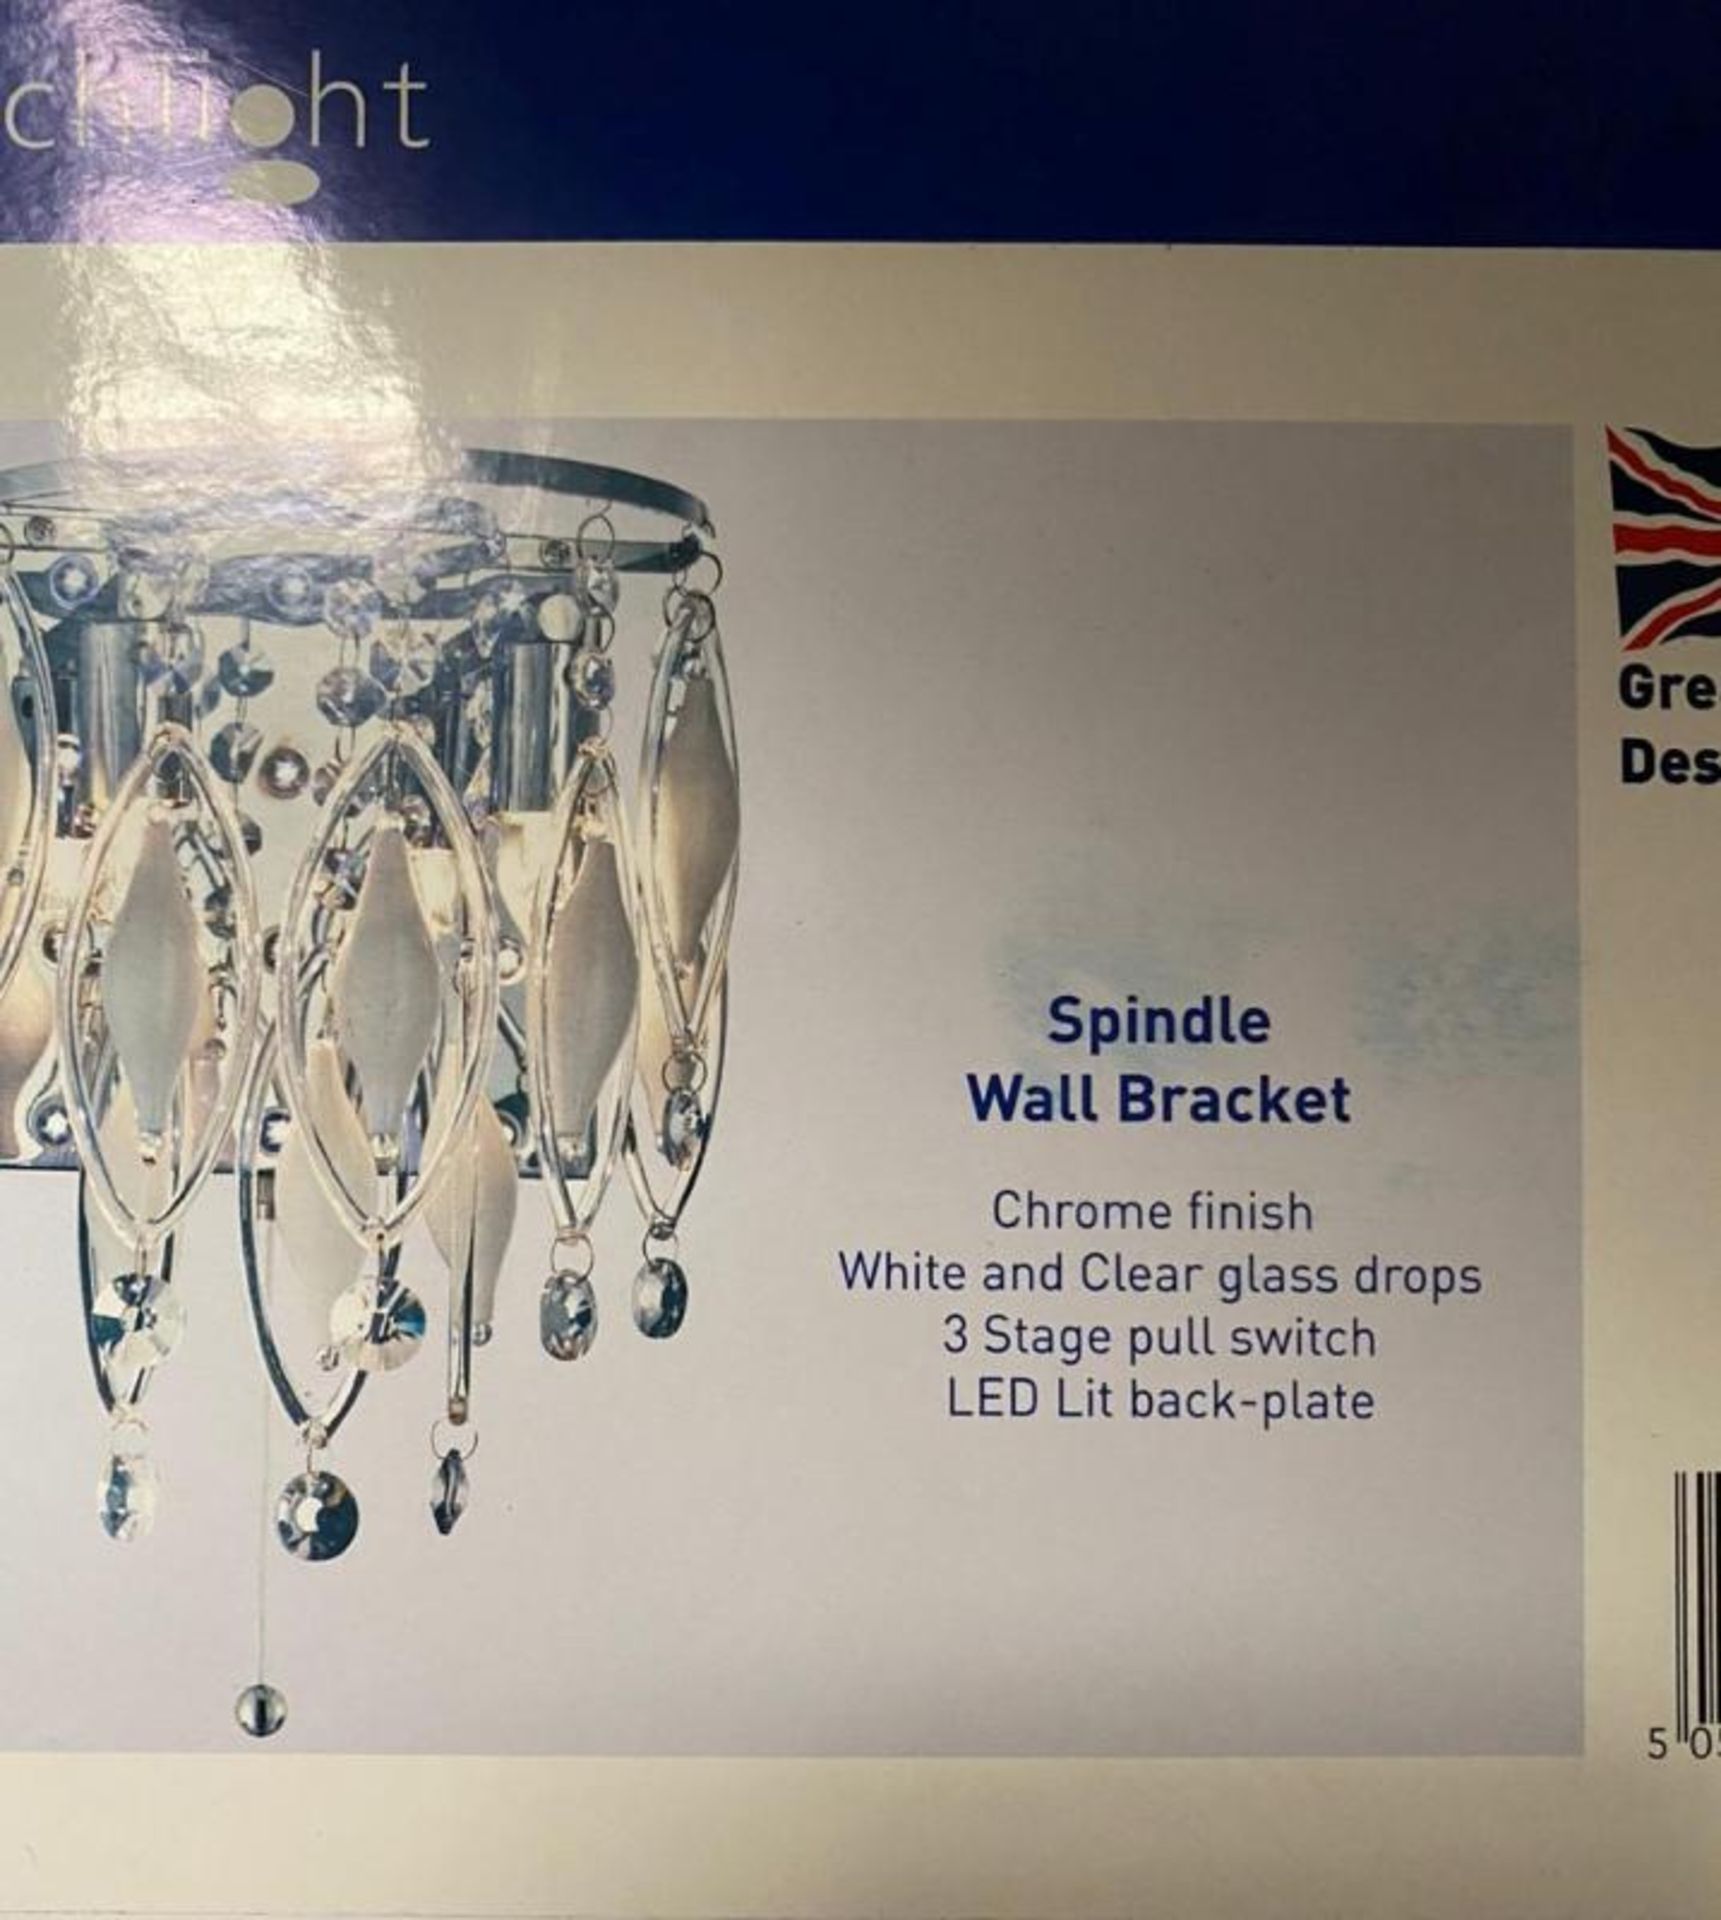 1 x Searchlight Spindle Wall Bracket in a chrome finish with white and clear glass drops - Ref: 3352 - Image 2 of 5